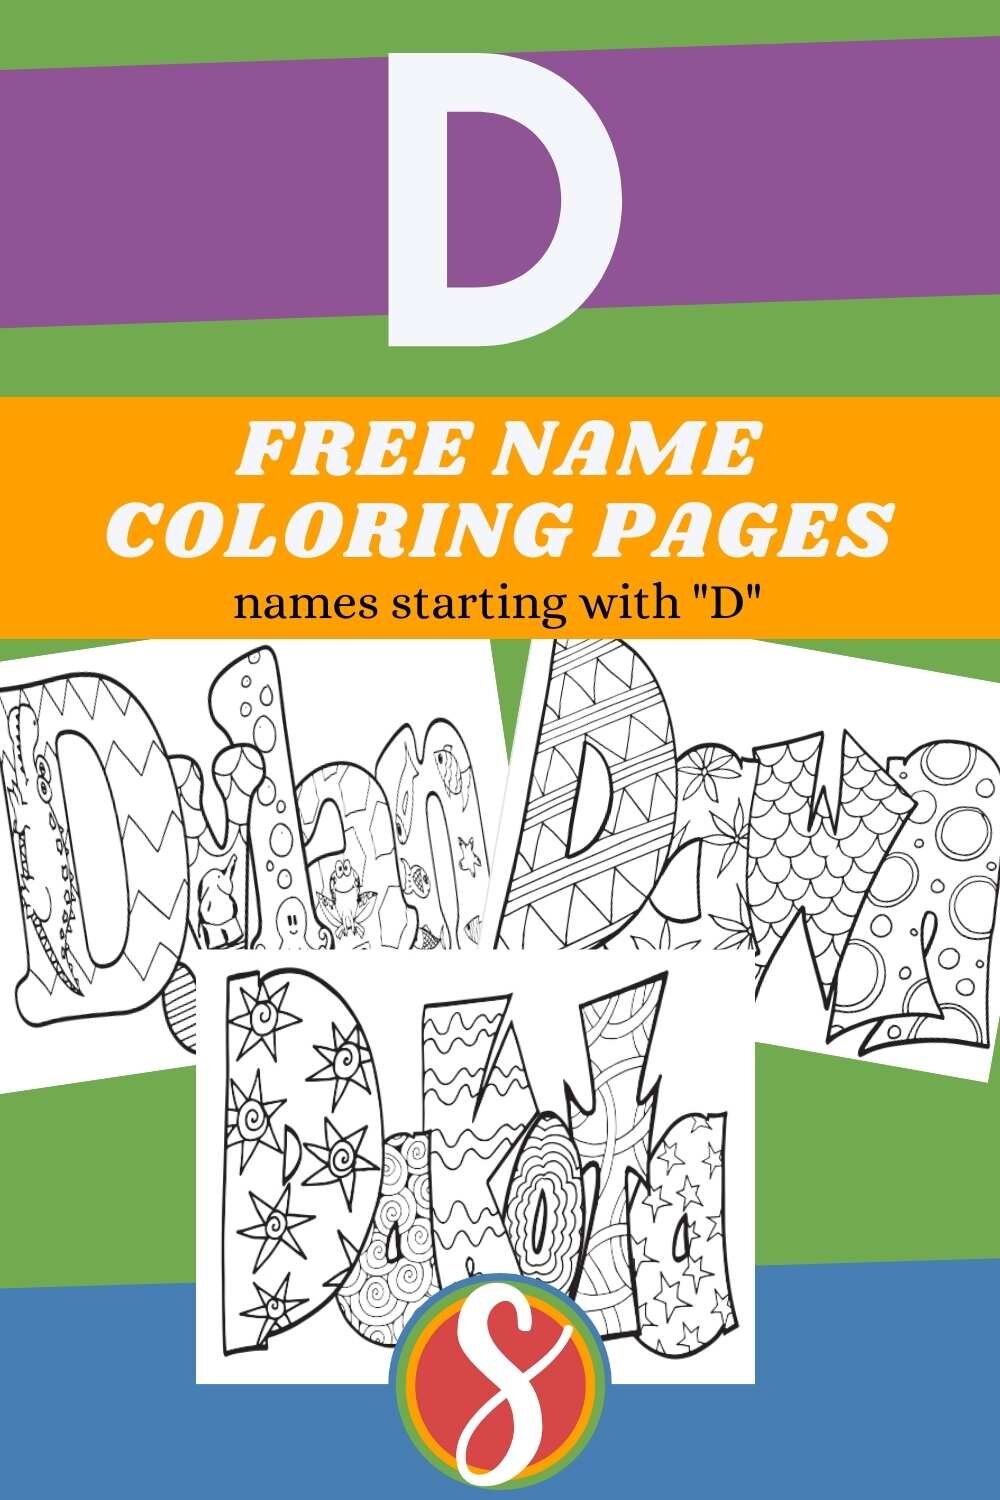 Free printable name coloring pages starting with the letter “D” from Stevie Doodles + browse all free names by letters